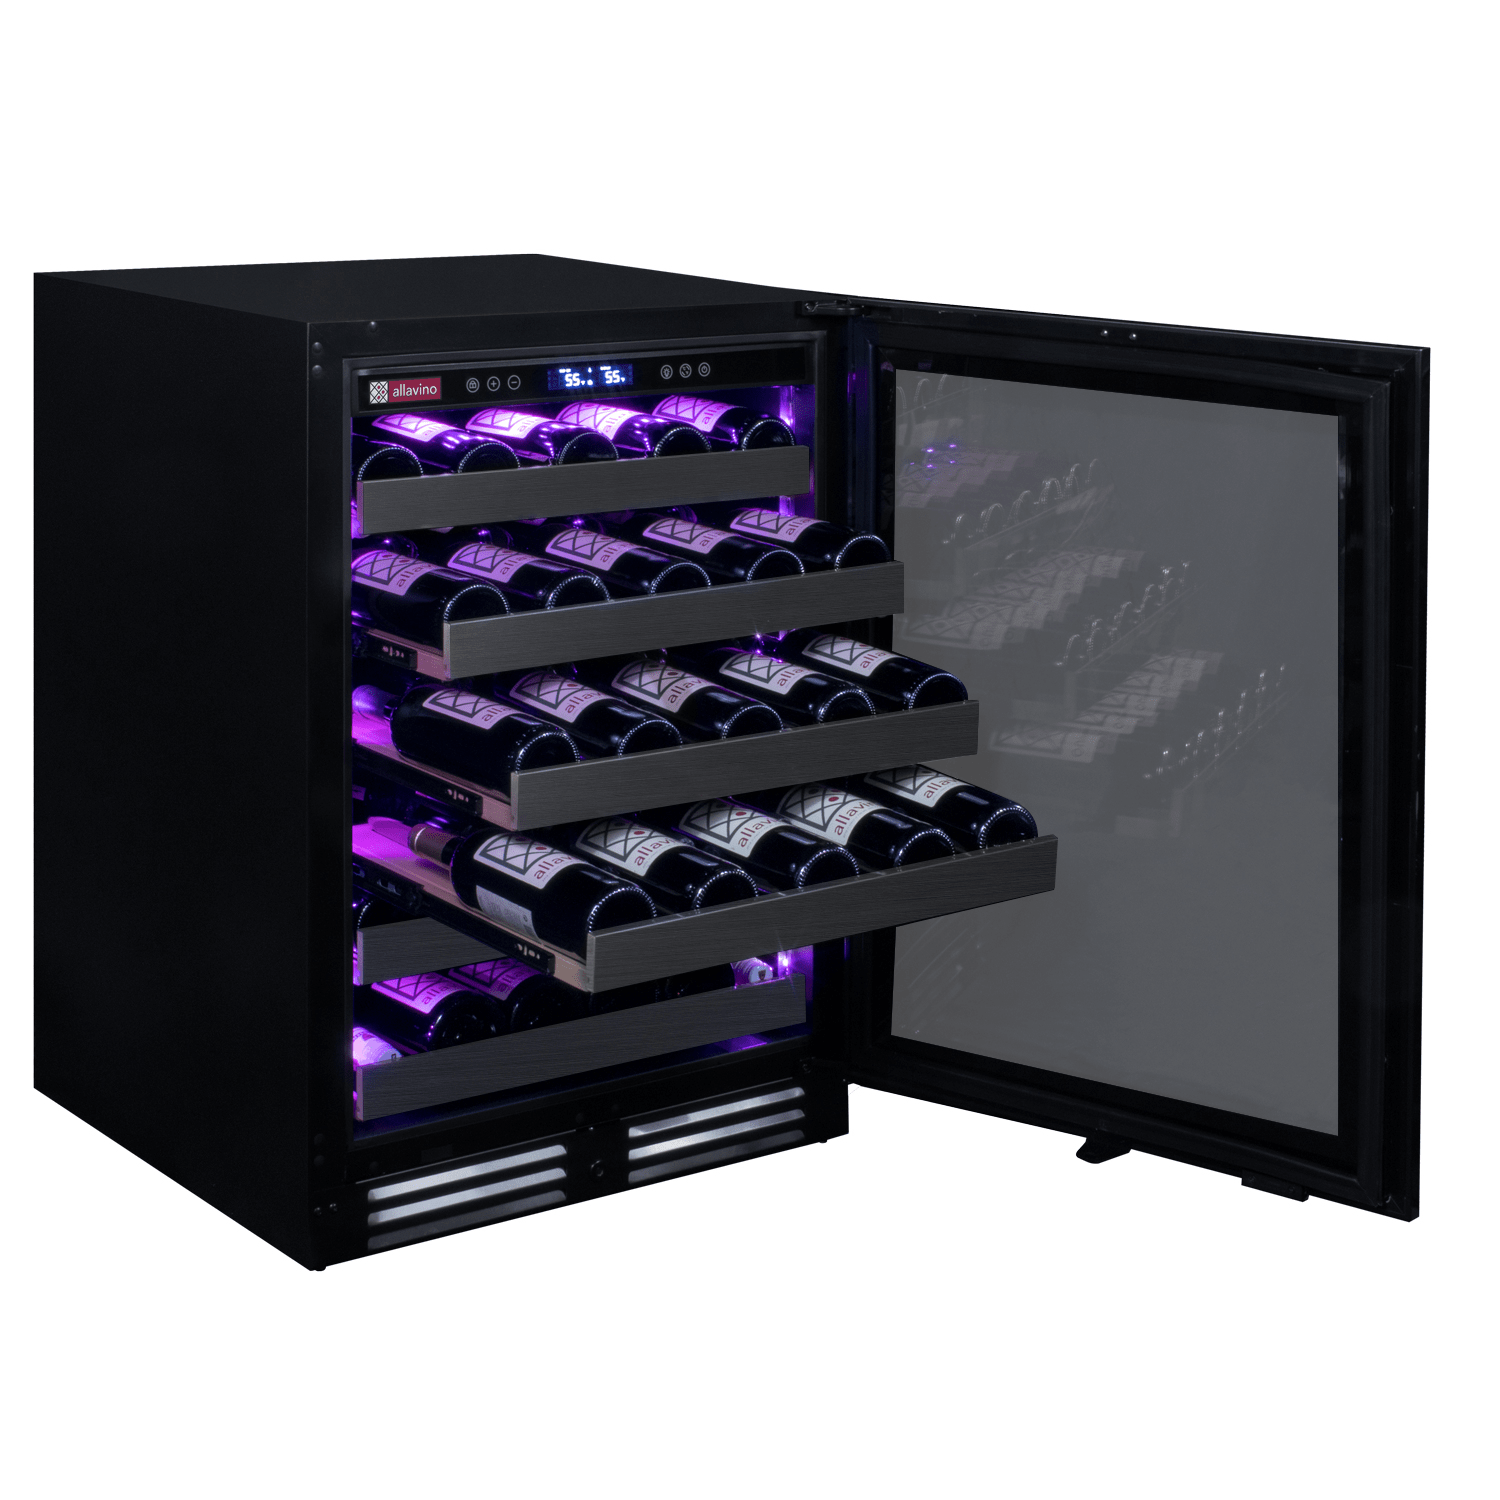 Allavino Reserva 50 Bottle Single Zone Right Hinge Wine Refrigerator BDW5034S-1BSR Wine Coolers BDW5034S-1BSR Luxury Appliances Direct